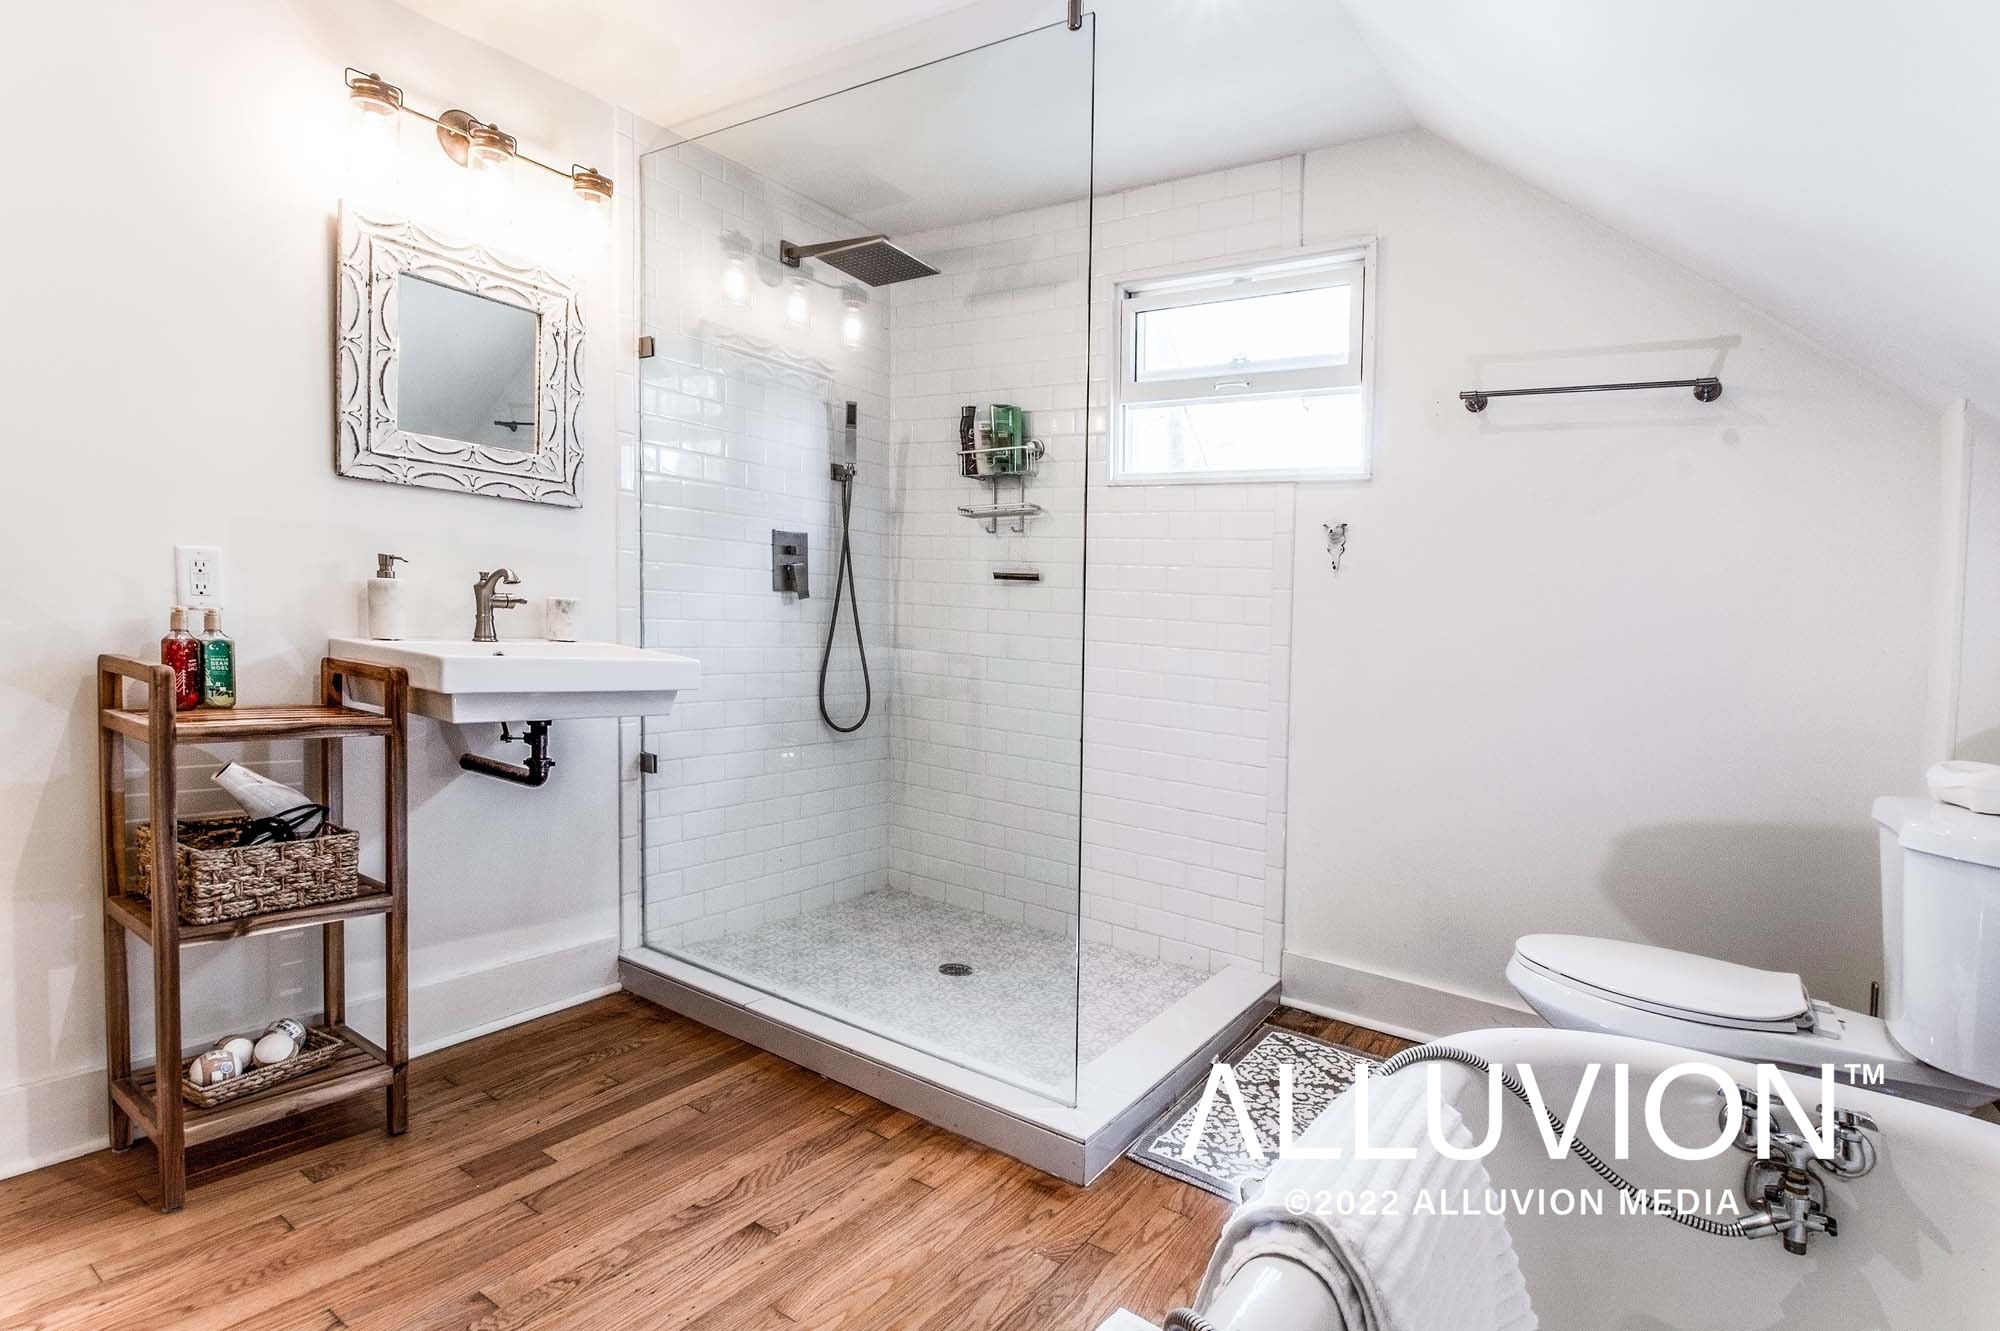 Modern Rustic Airbnb Real Estate Photography in Woodstock, NY – Duncan Avenue Studios